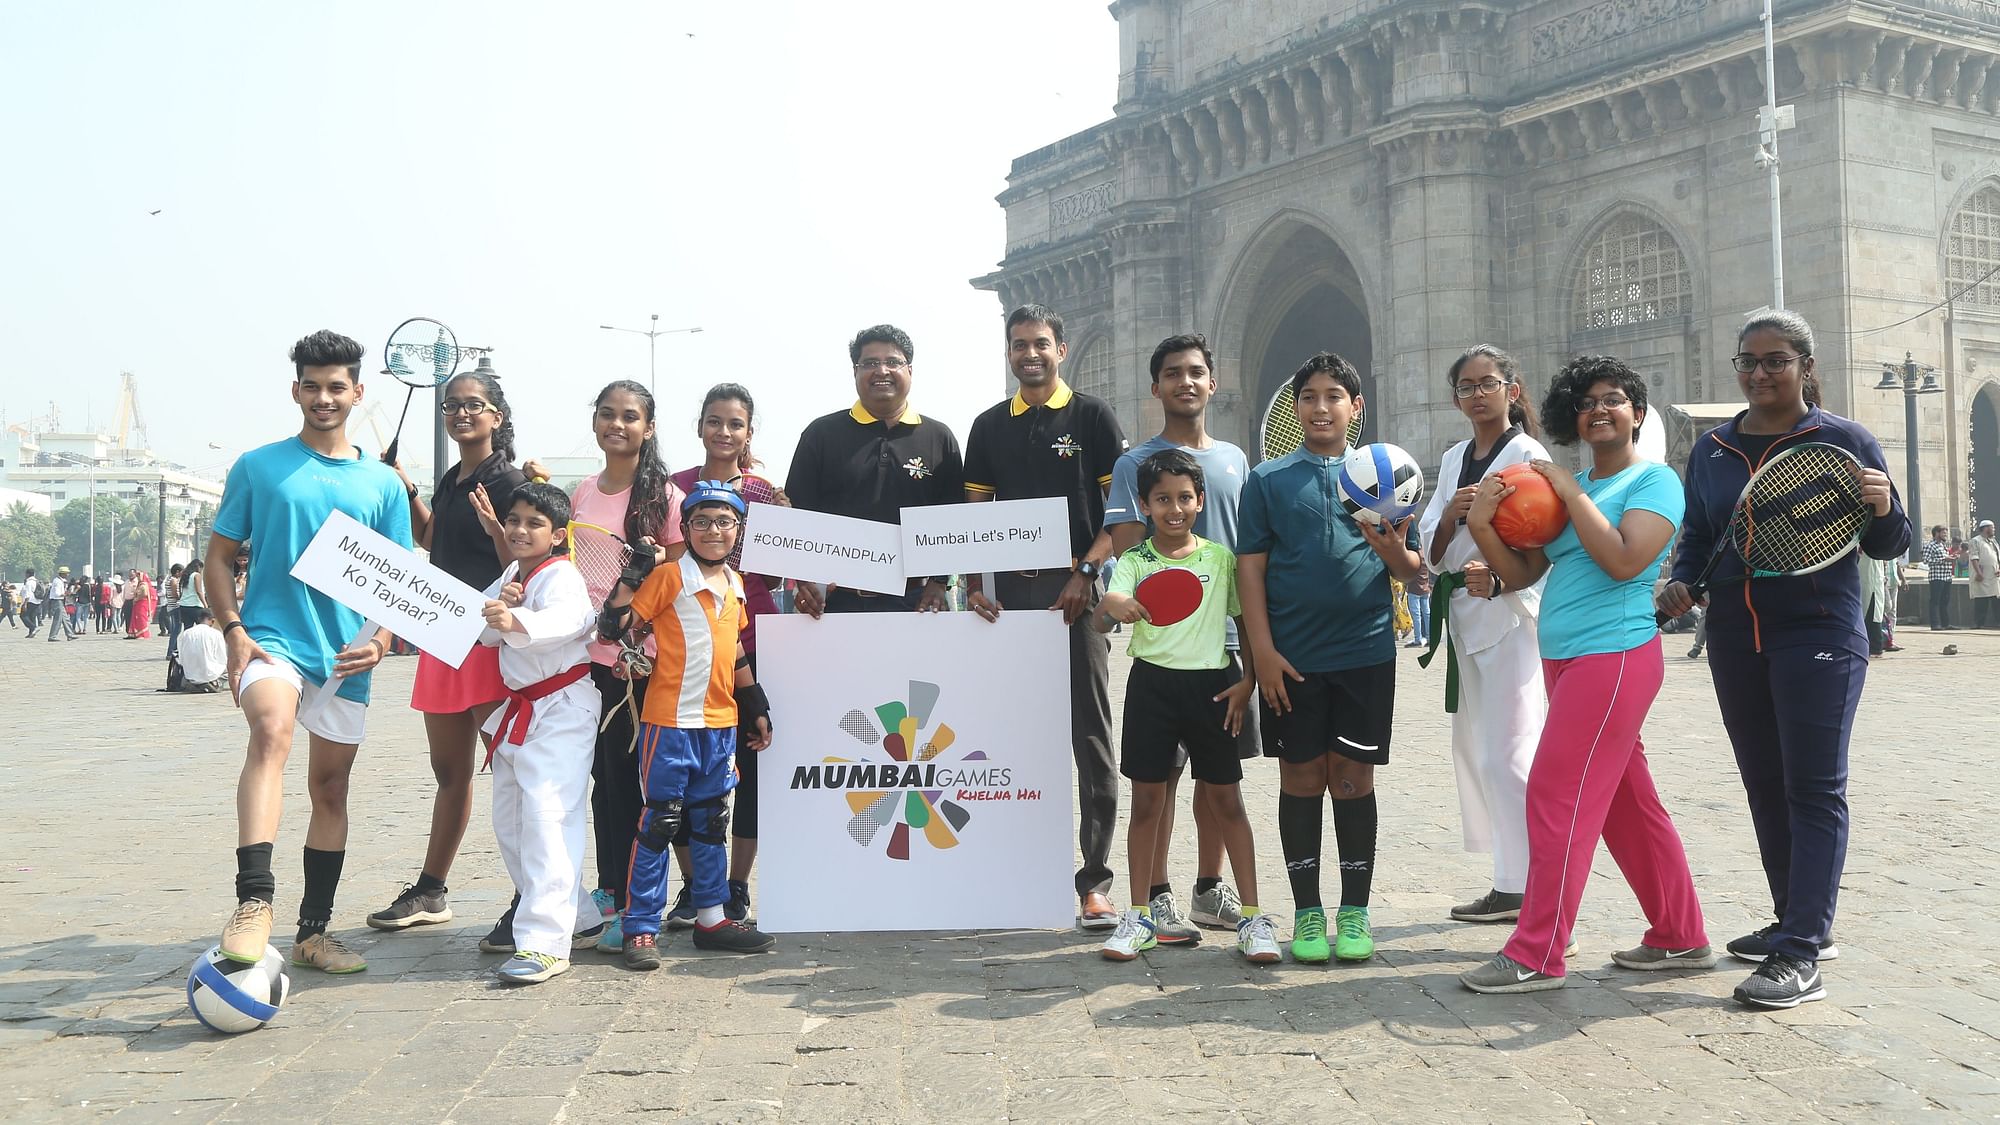 Total 20 sports will be played in the Mumbai Games and around 20,000 participants will take part in it.